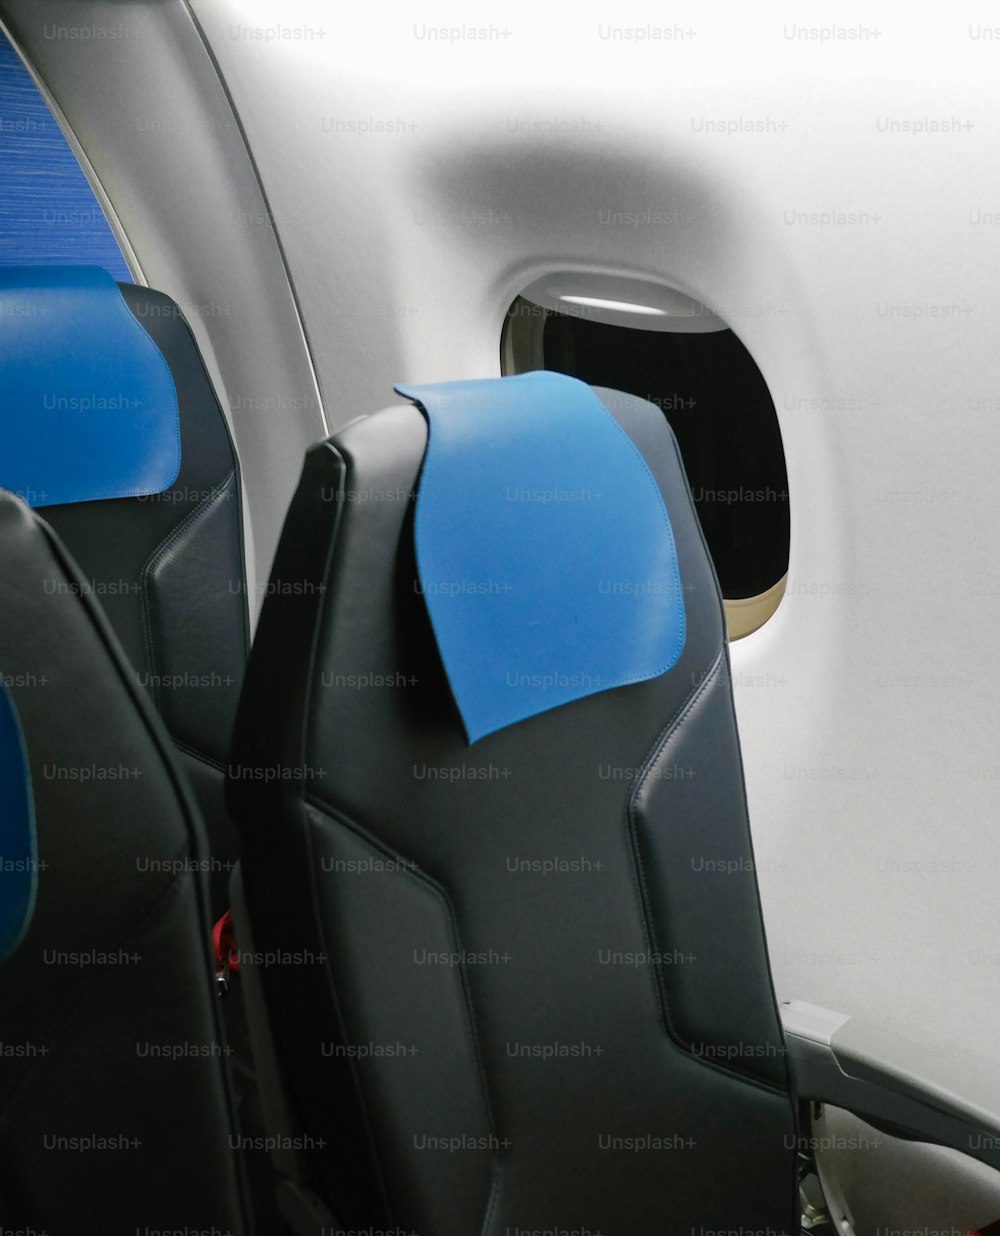 the seats in the airplane are blue and black